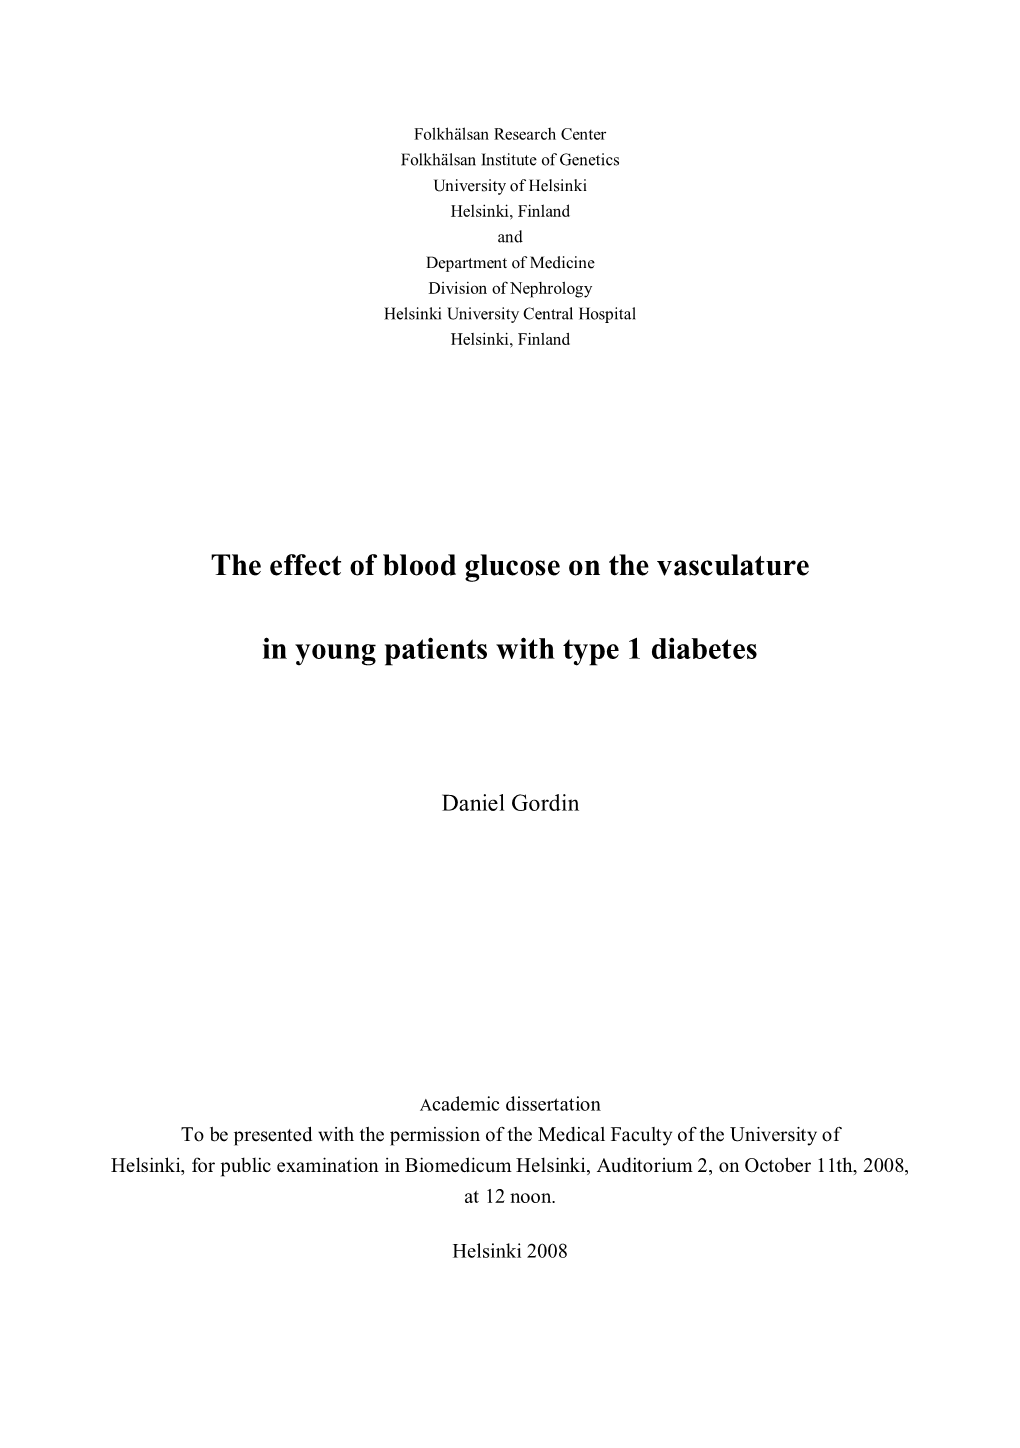 The Effect of Blood Glucose on the Vasculature in Young